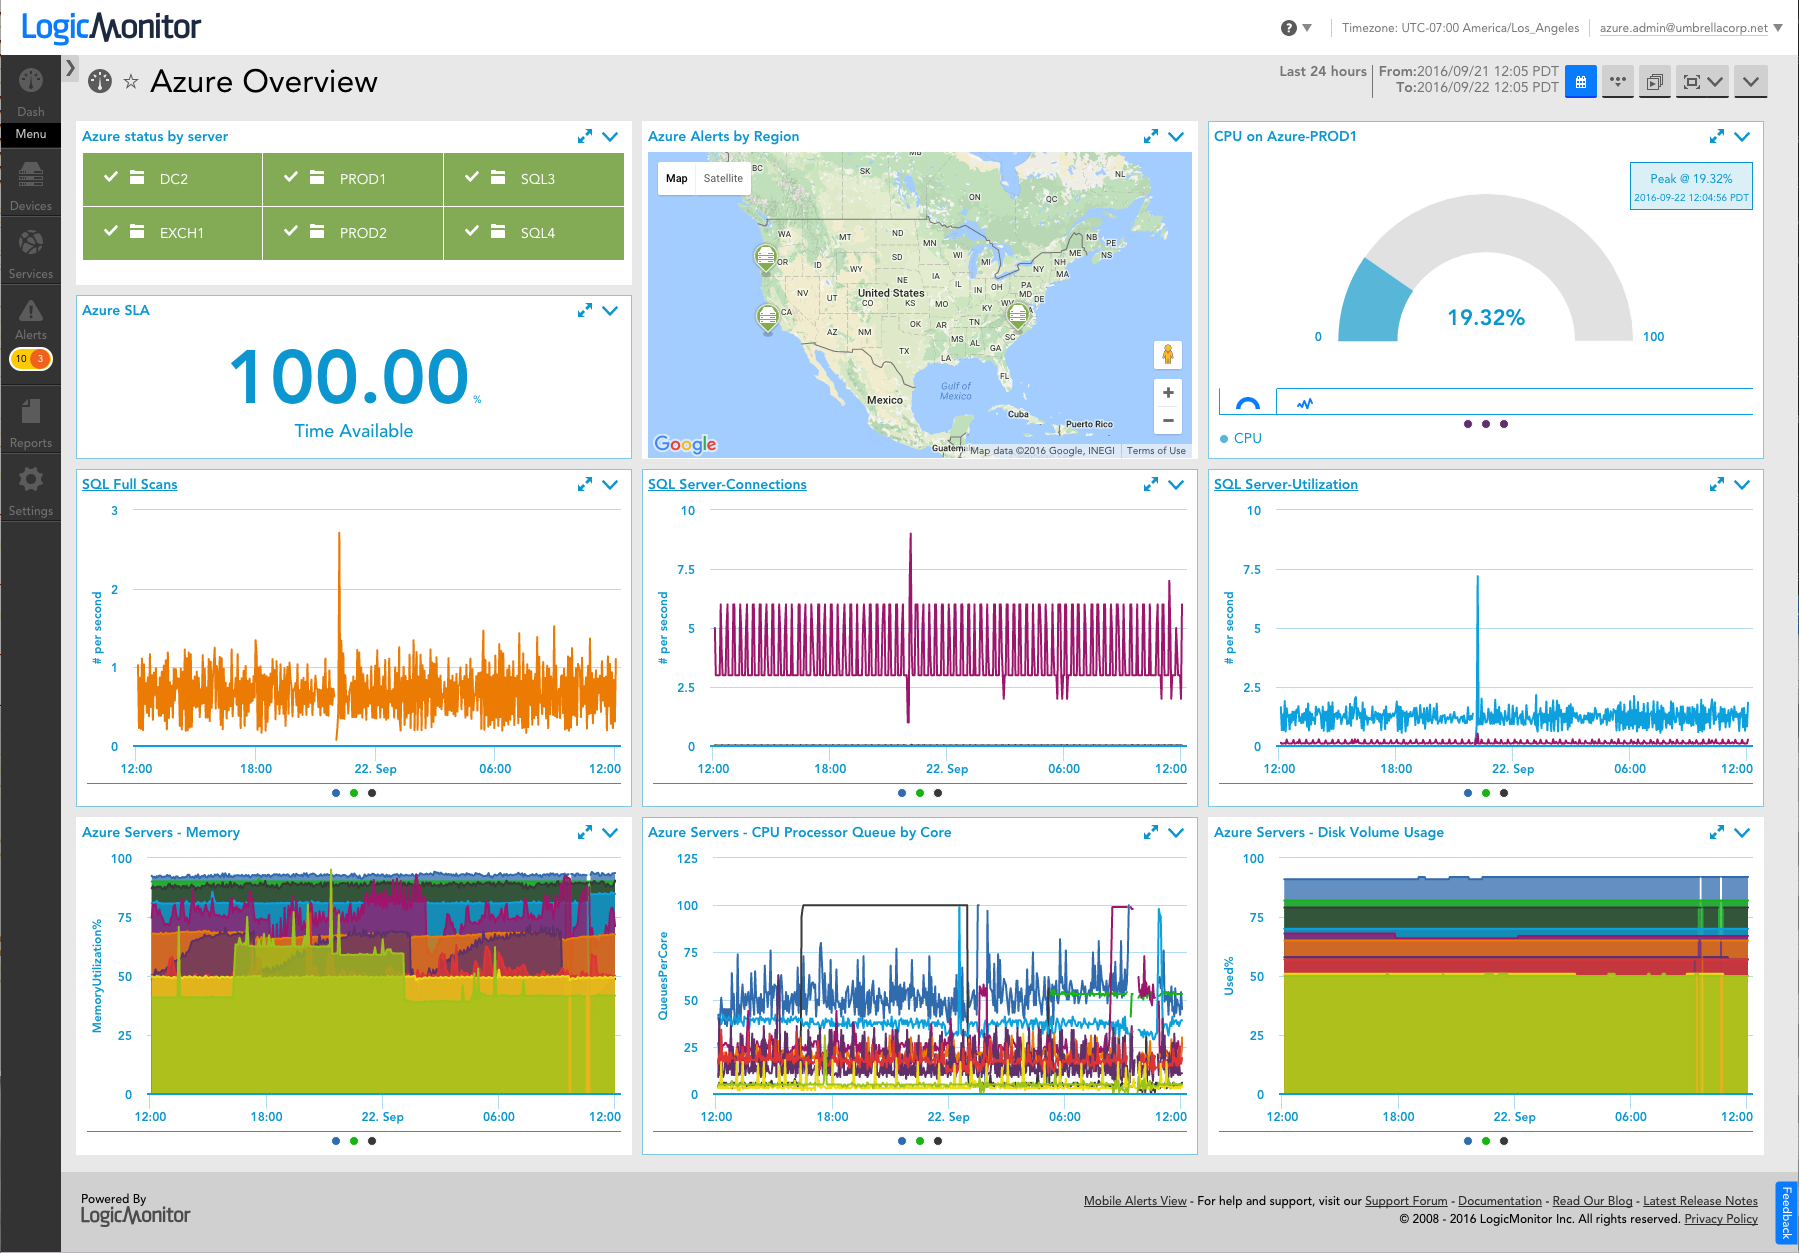 LogicMonitor dashboard showing an overview of an Azure environment.